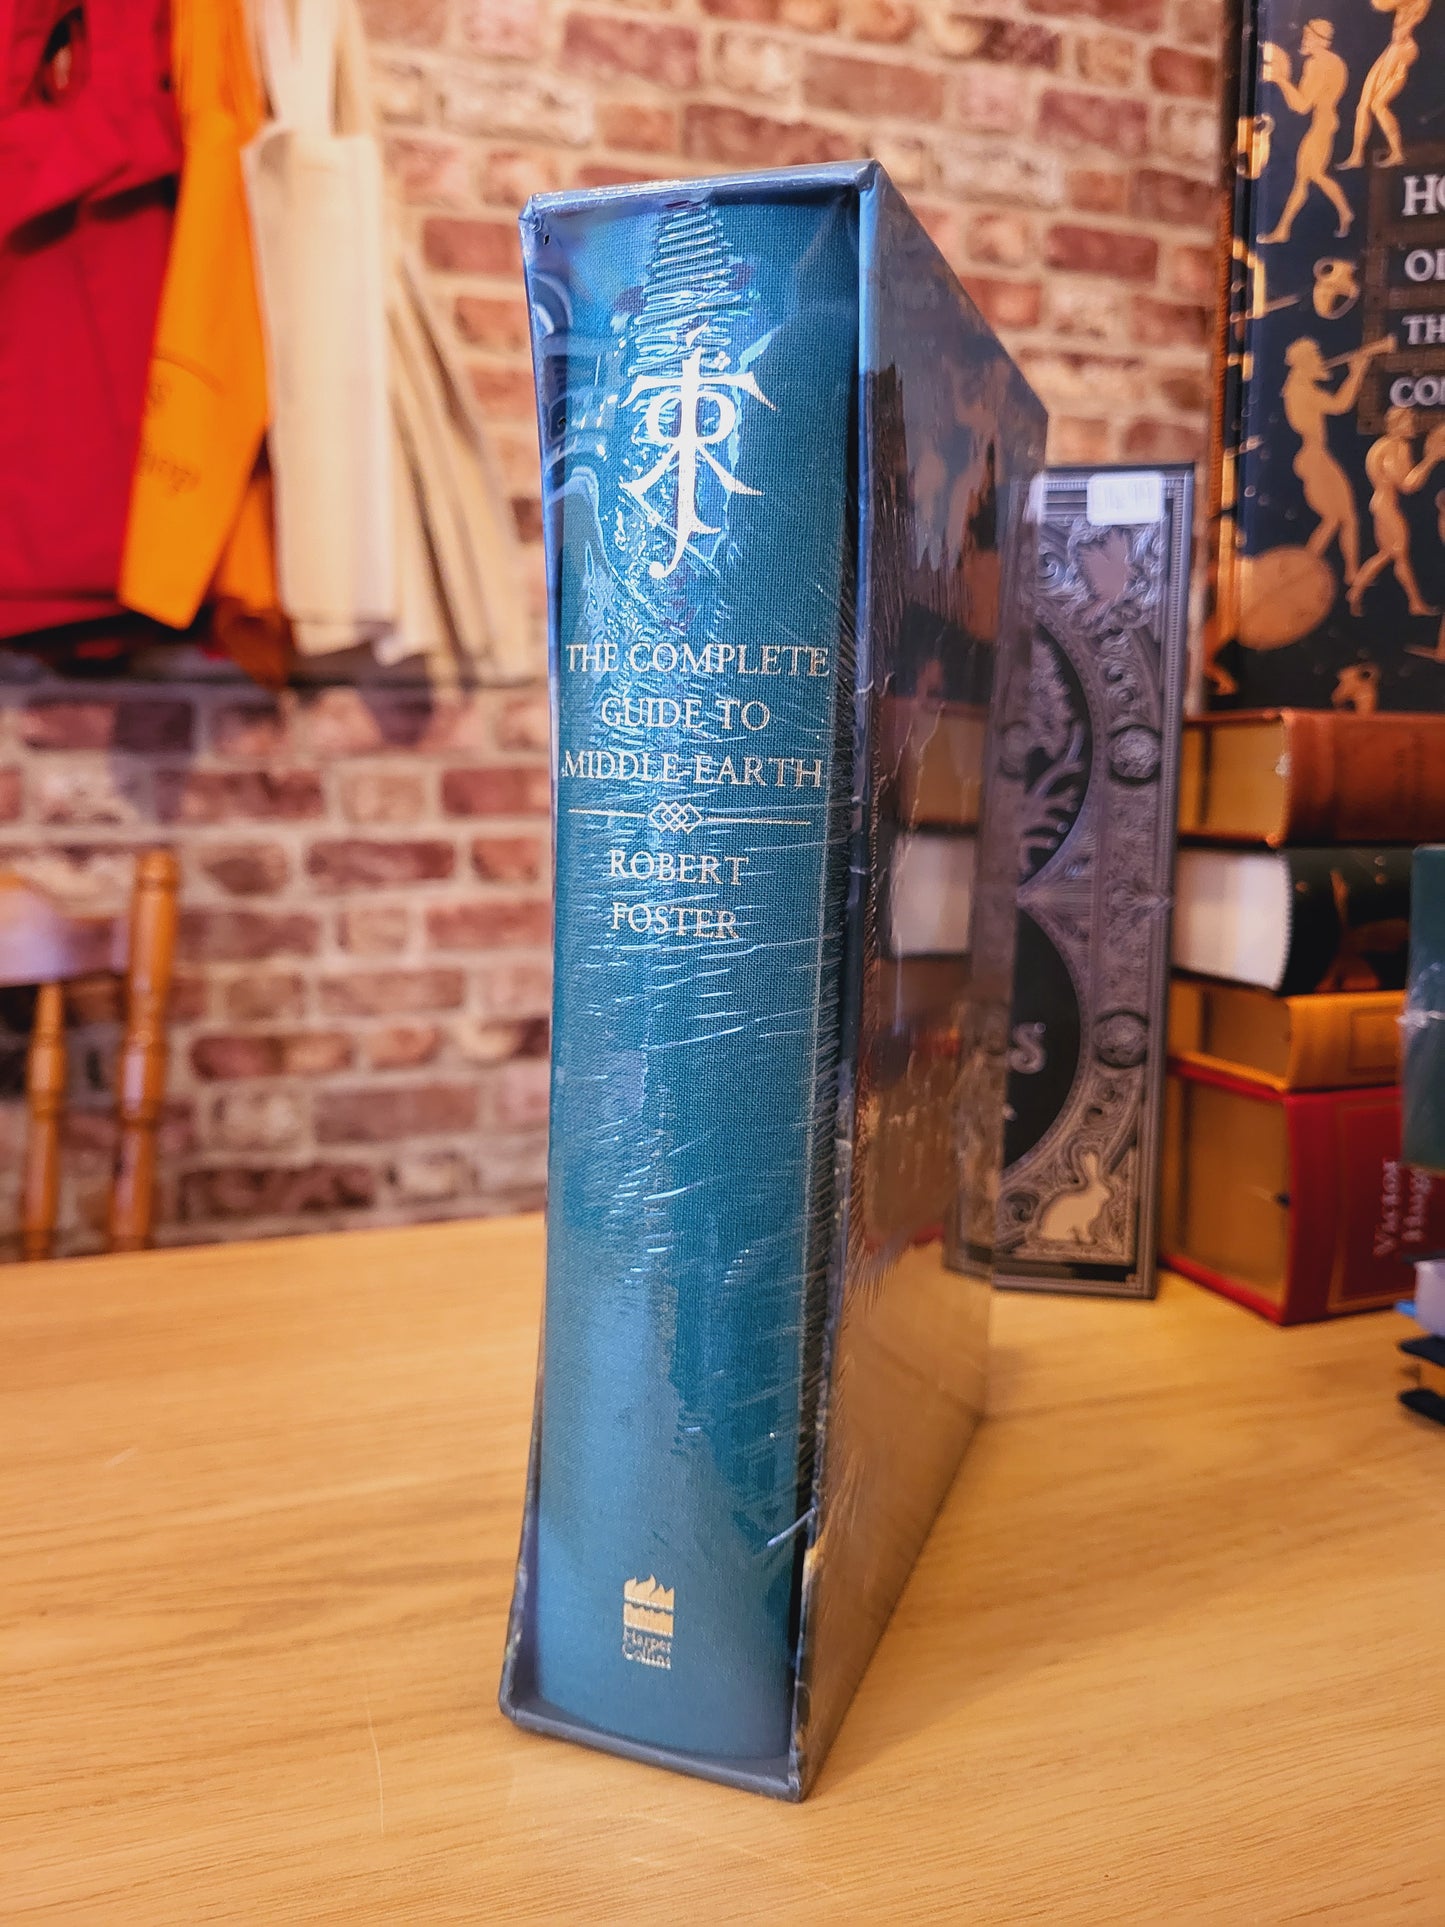 The Complete Guide to Middle Earth - Robert Foster (Deluxe Slipcase Edition)